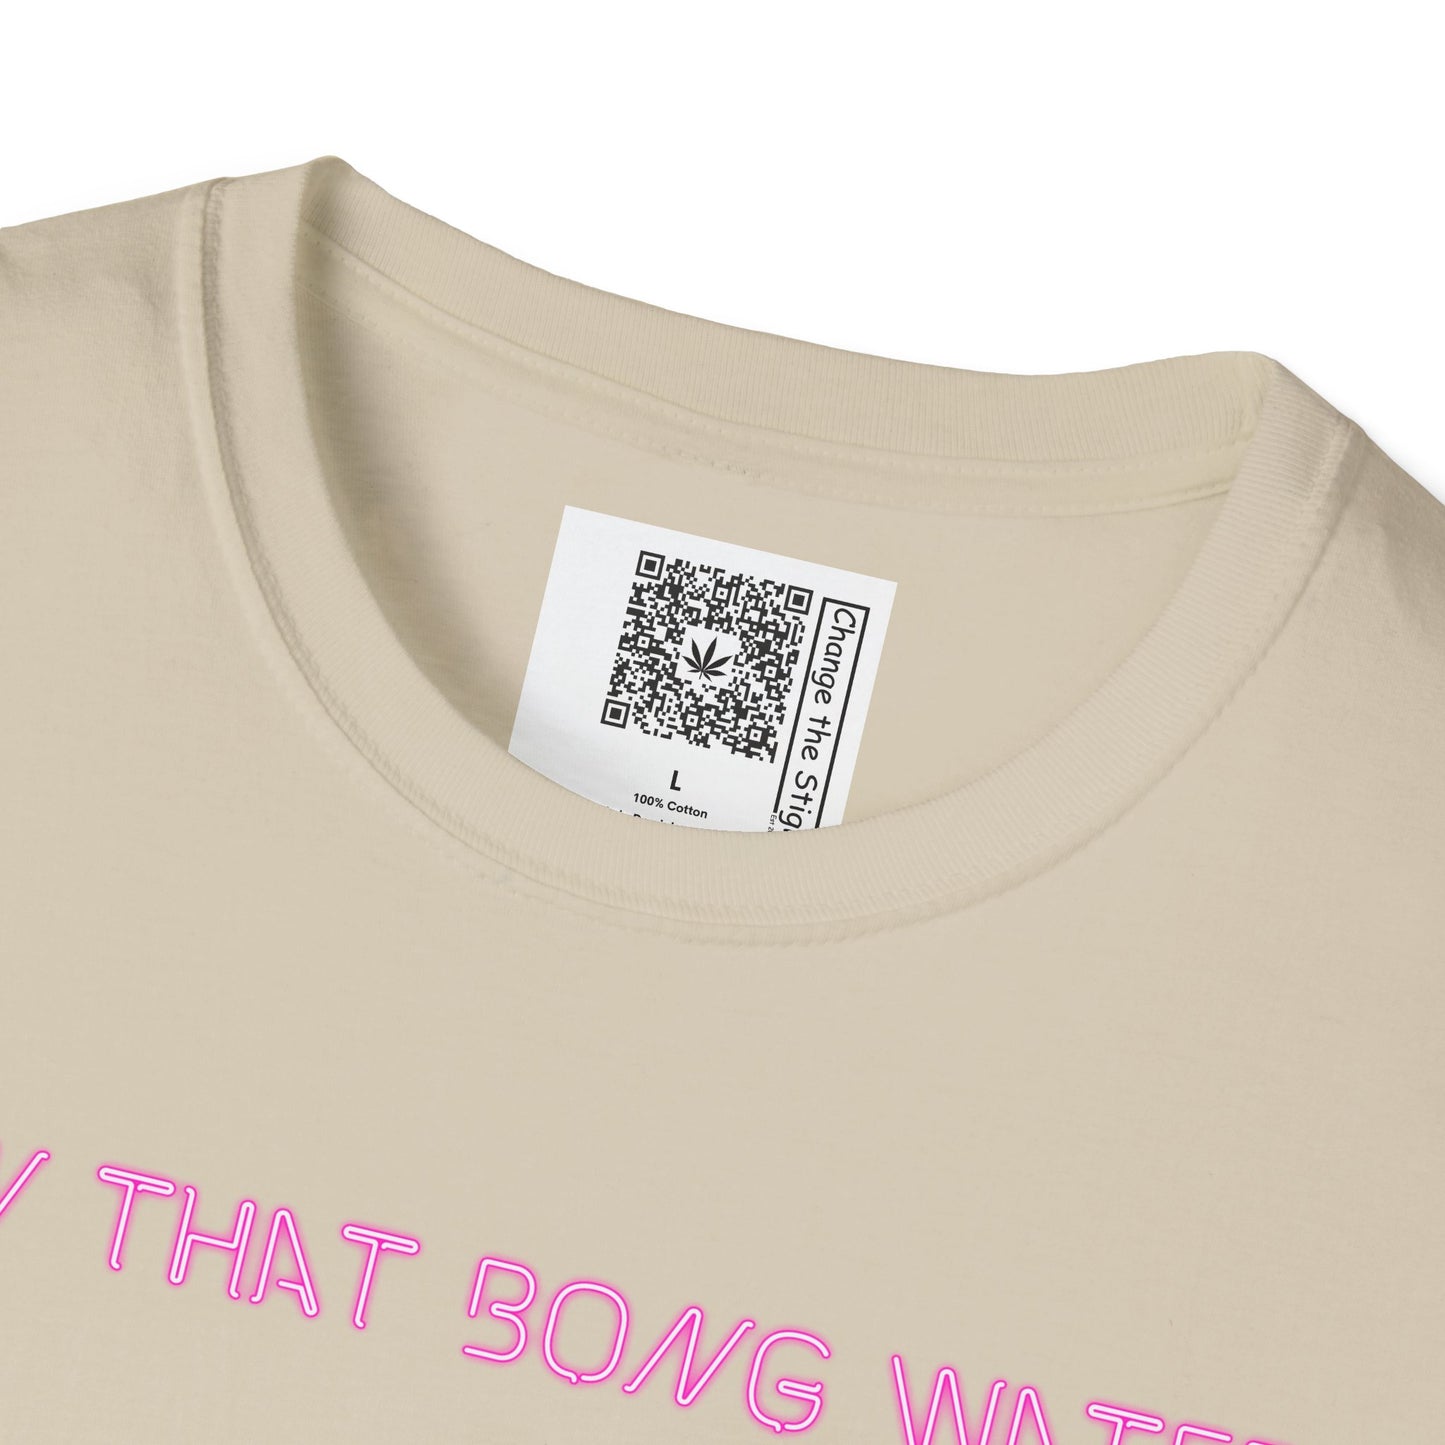 Change the Stigma CLEAN YOUR BONG WATER Pink Ltr Weed Shirt